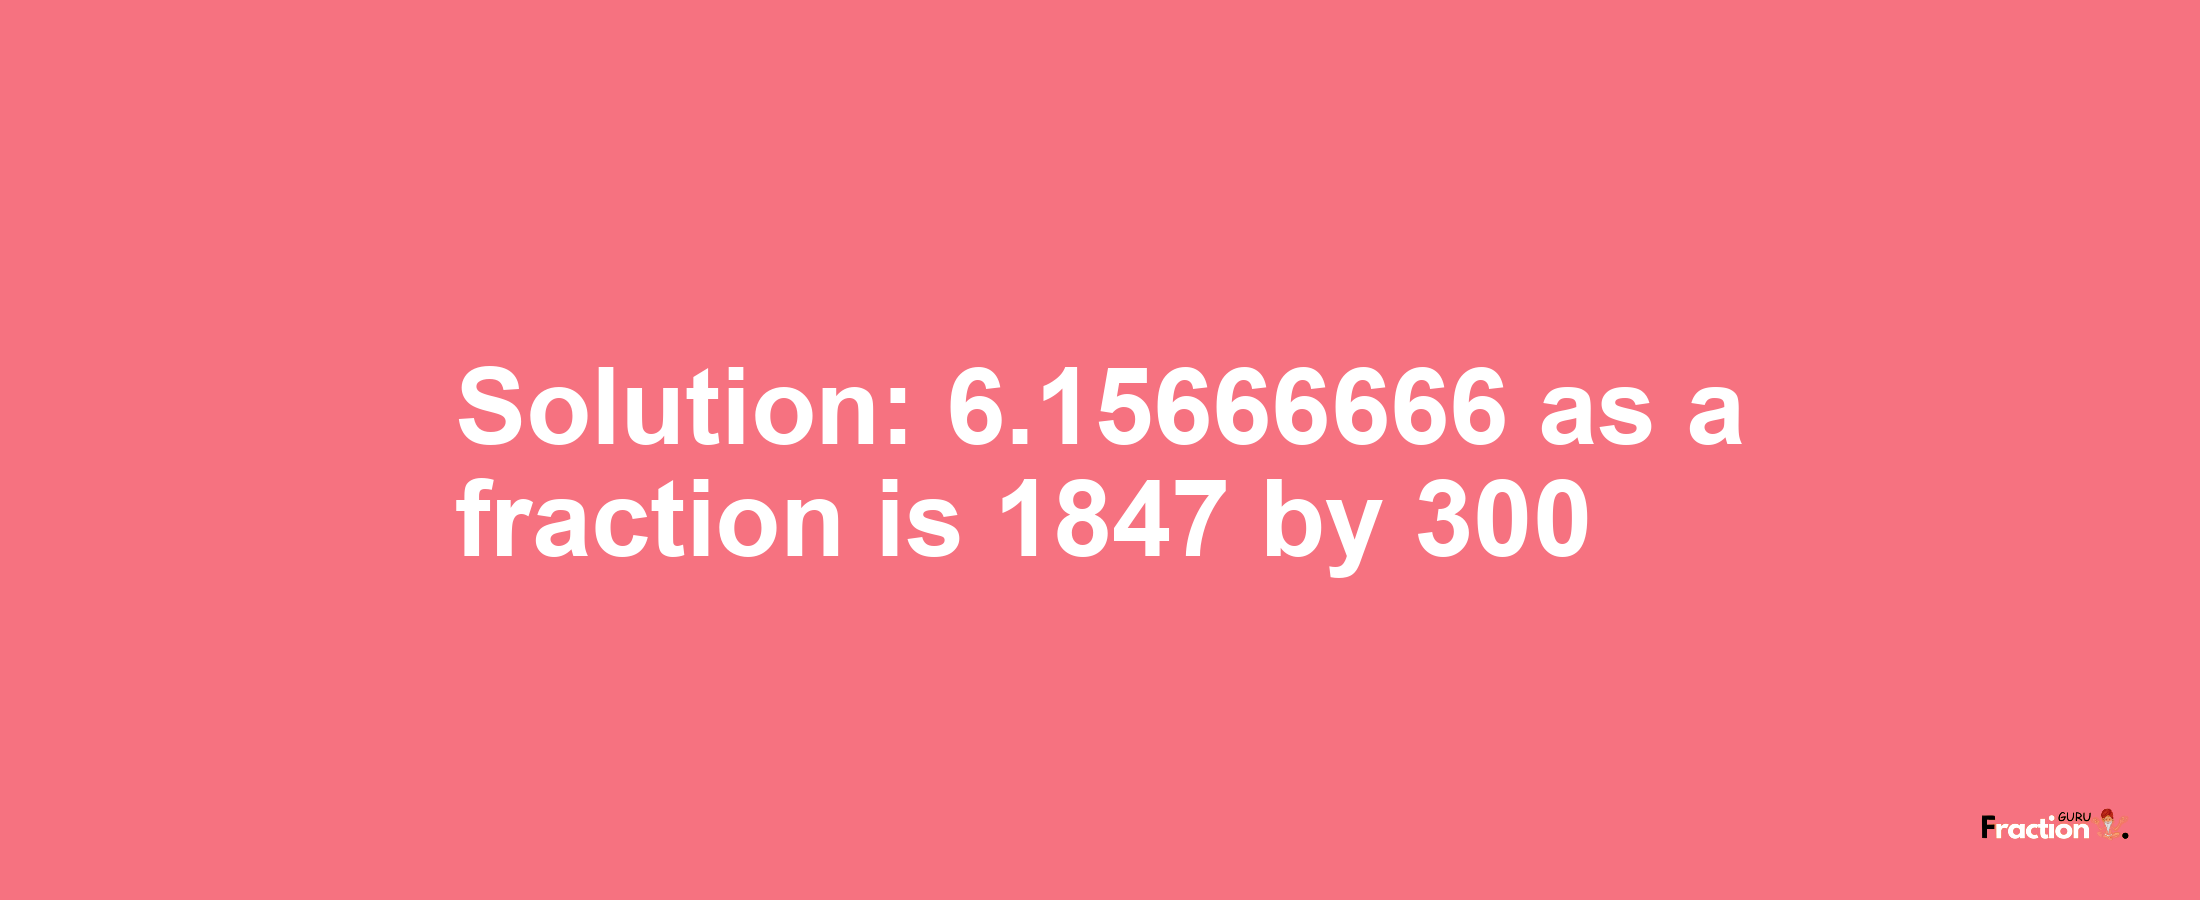 Solution:6.15666666 as a fraction is 1847/300